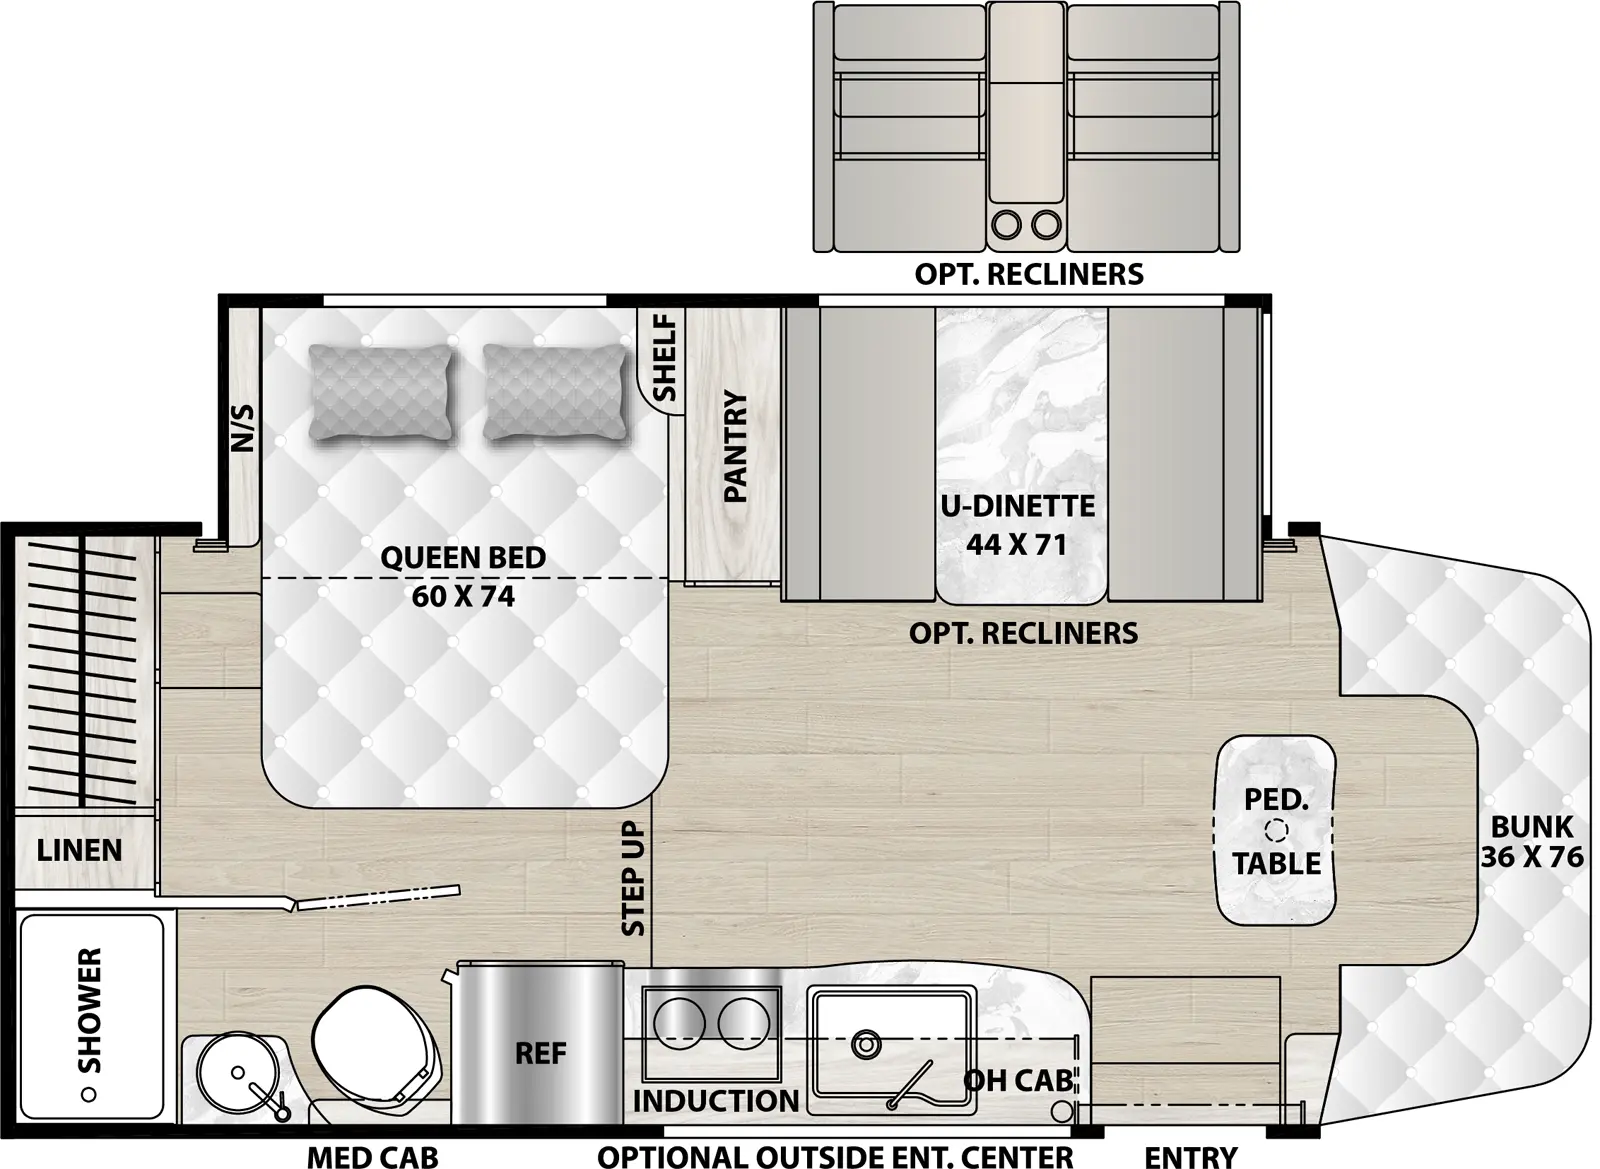 The 24FS has one slideout and one entry. Exterior features an optional outside entertainment center. Interior layout front to back: front cab with bunk above and pedestal table; off-door side slideout with u-dinette (optional recliners), pantry, and side-facing queen bed with shelf and nightstand; door side entry, kitchen counter with sink, overhead cabinet, induction cooktop, and refrigerator; rear wardrobe and linen closet, and rear door side full bathroom.